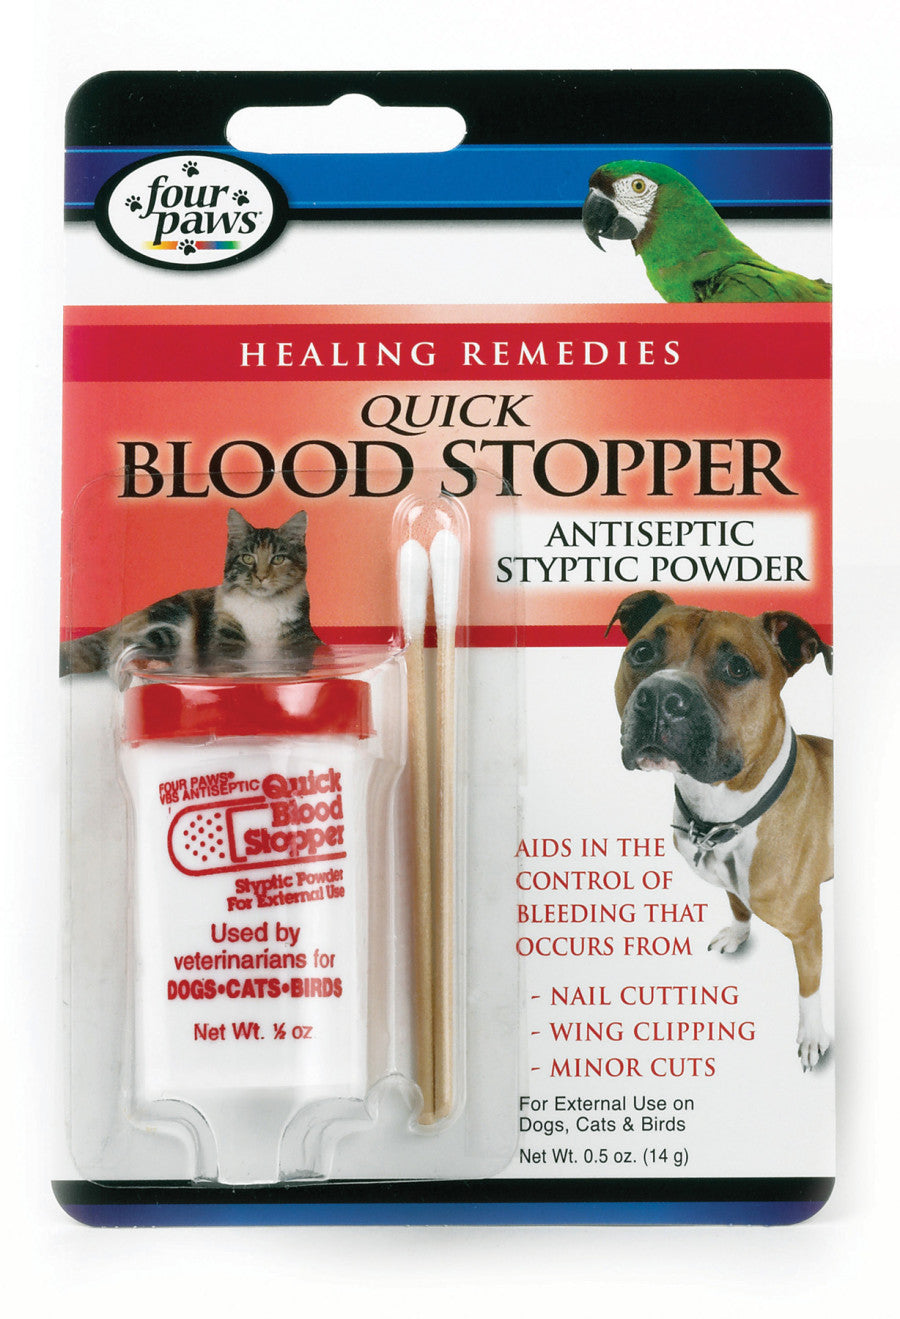 QUICK BLOOD STOPPER